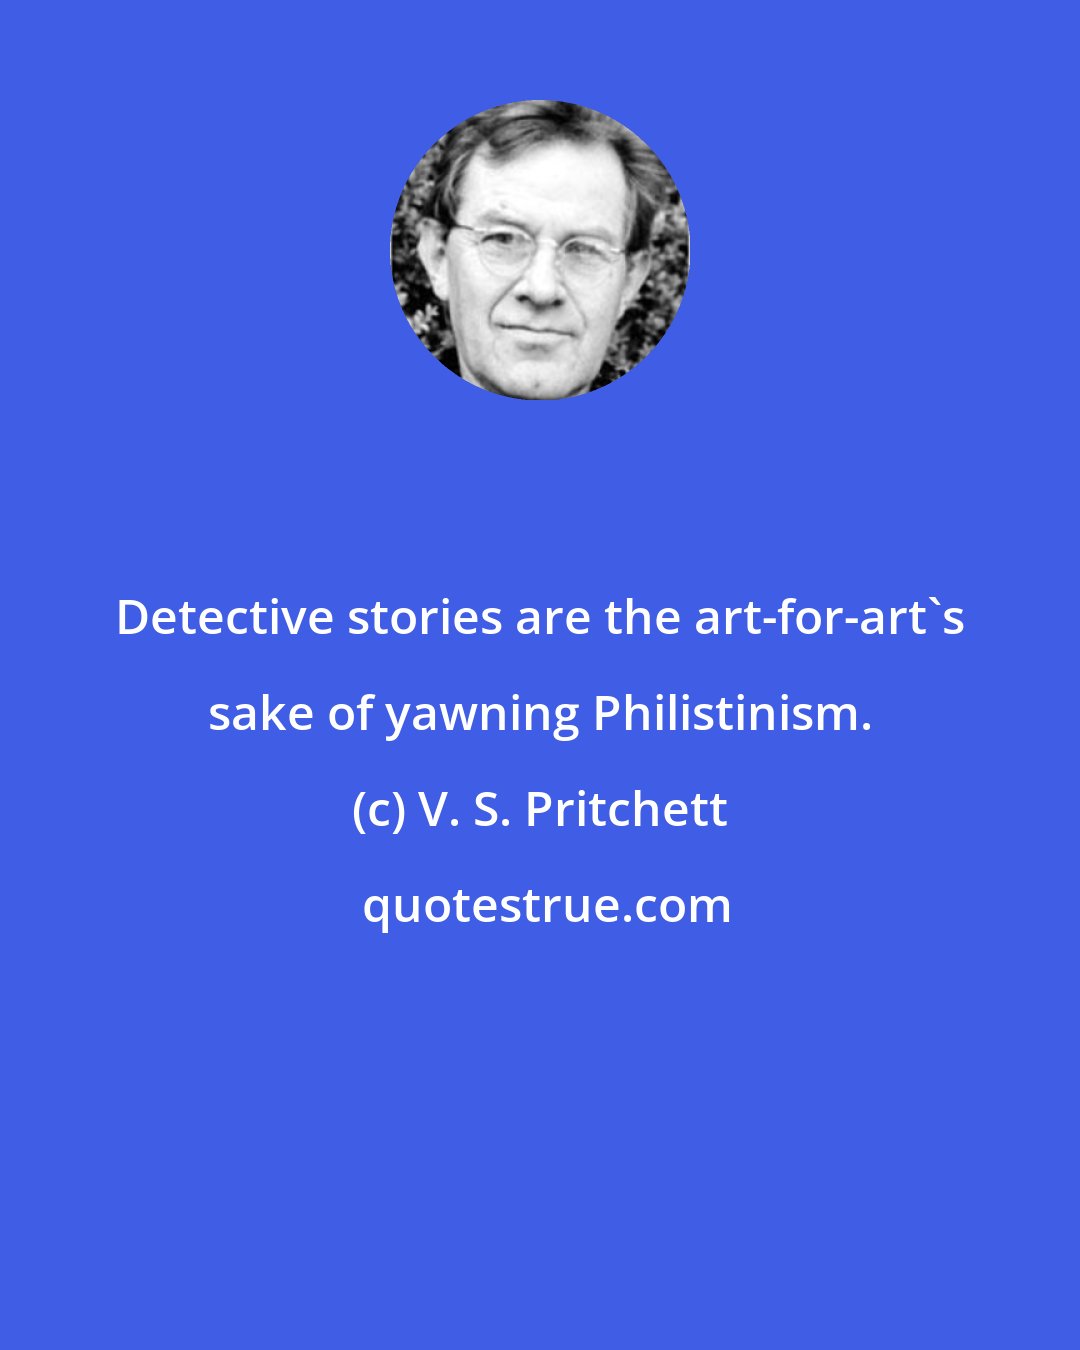 V. S. Pritchett: Detective stories are the art-for-art's sake of yawning Philistinism.